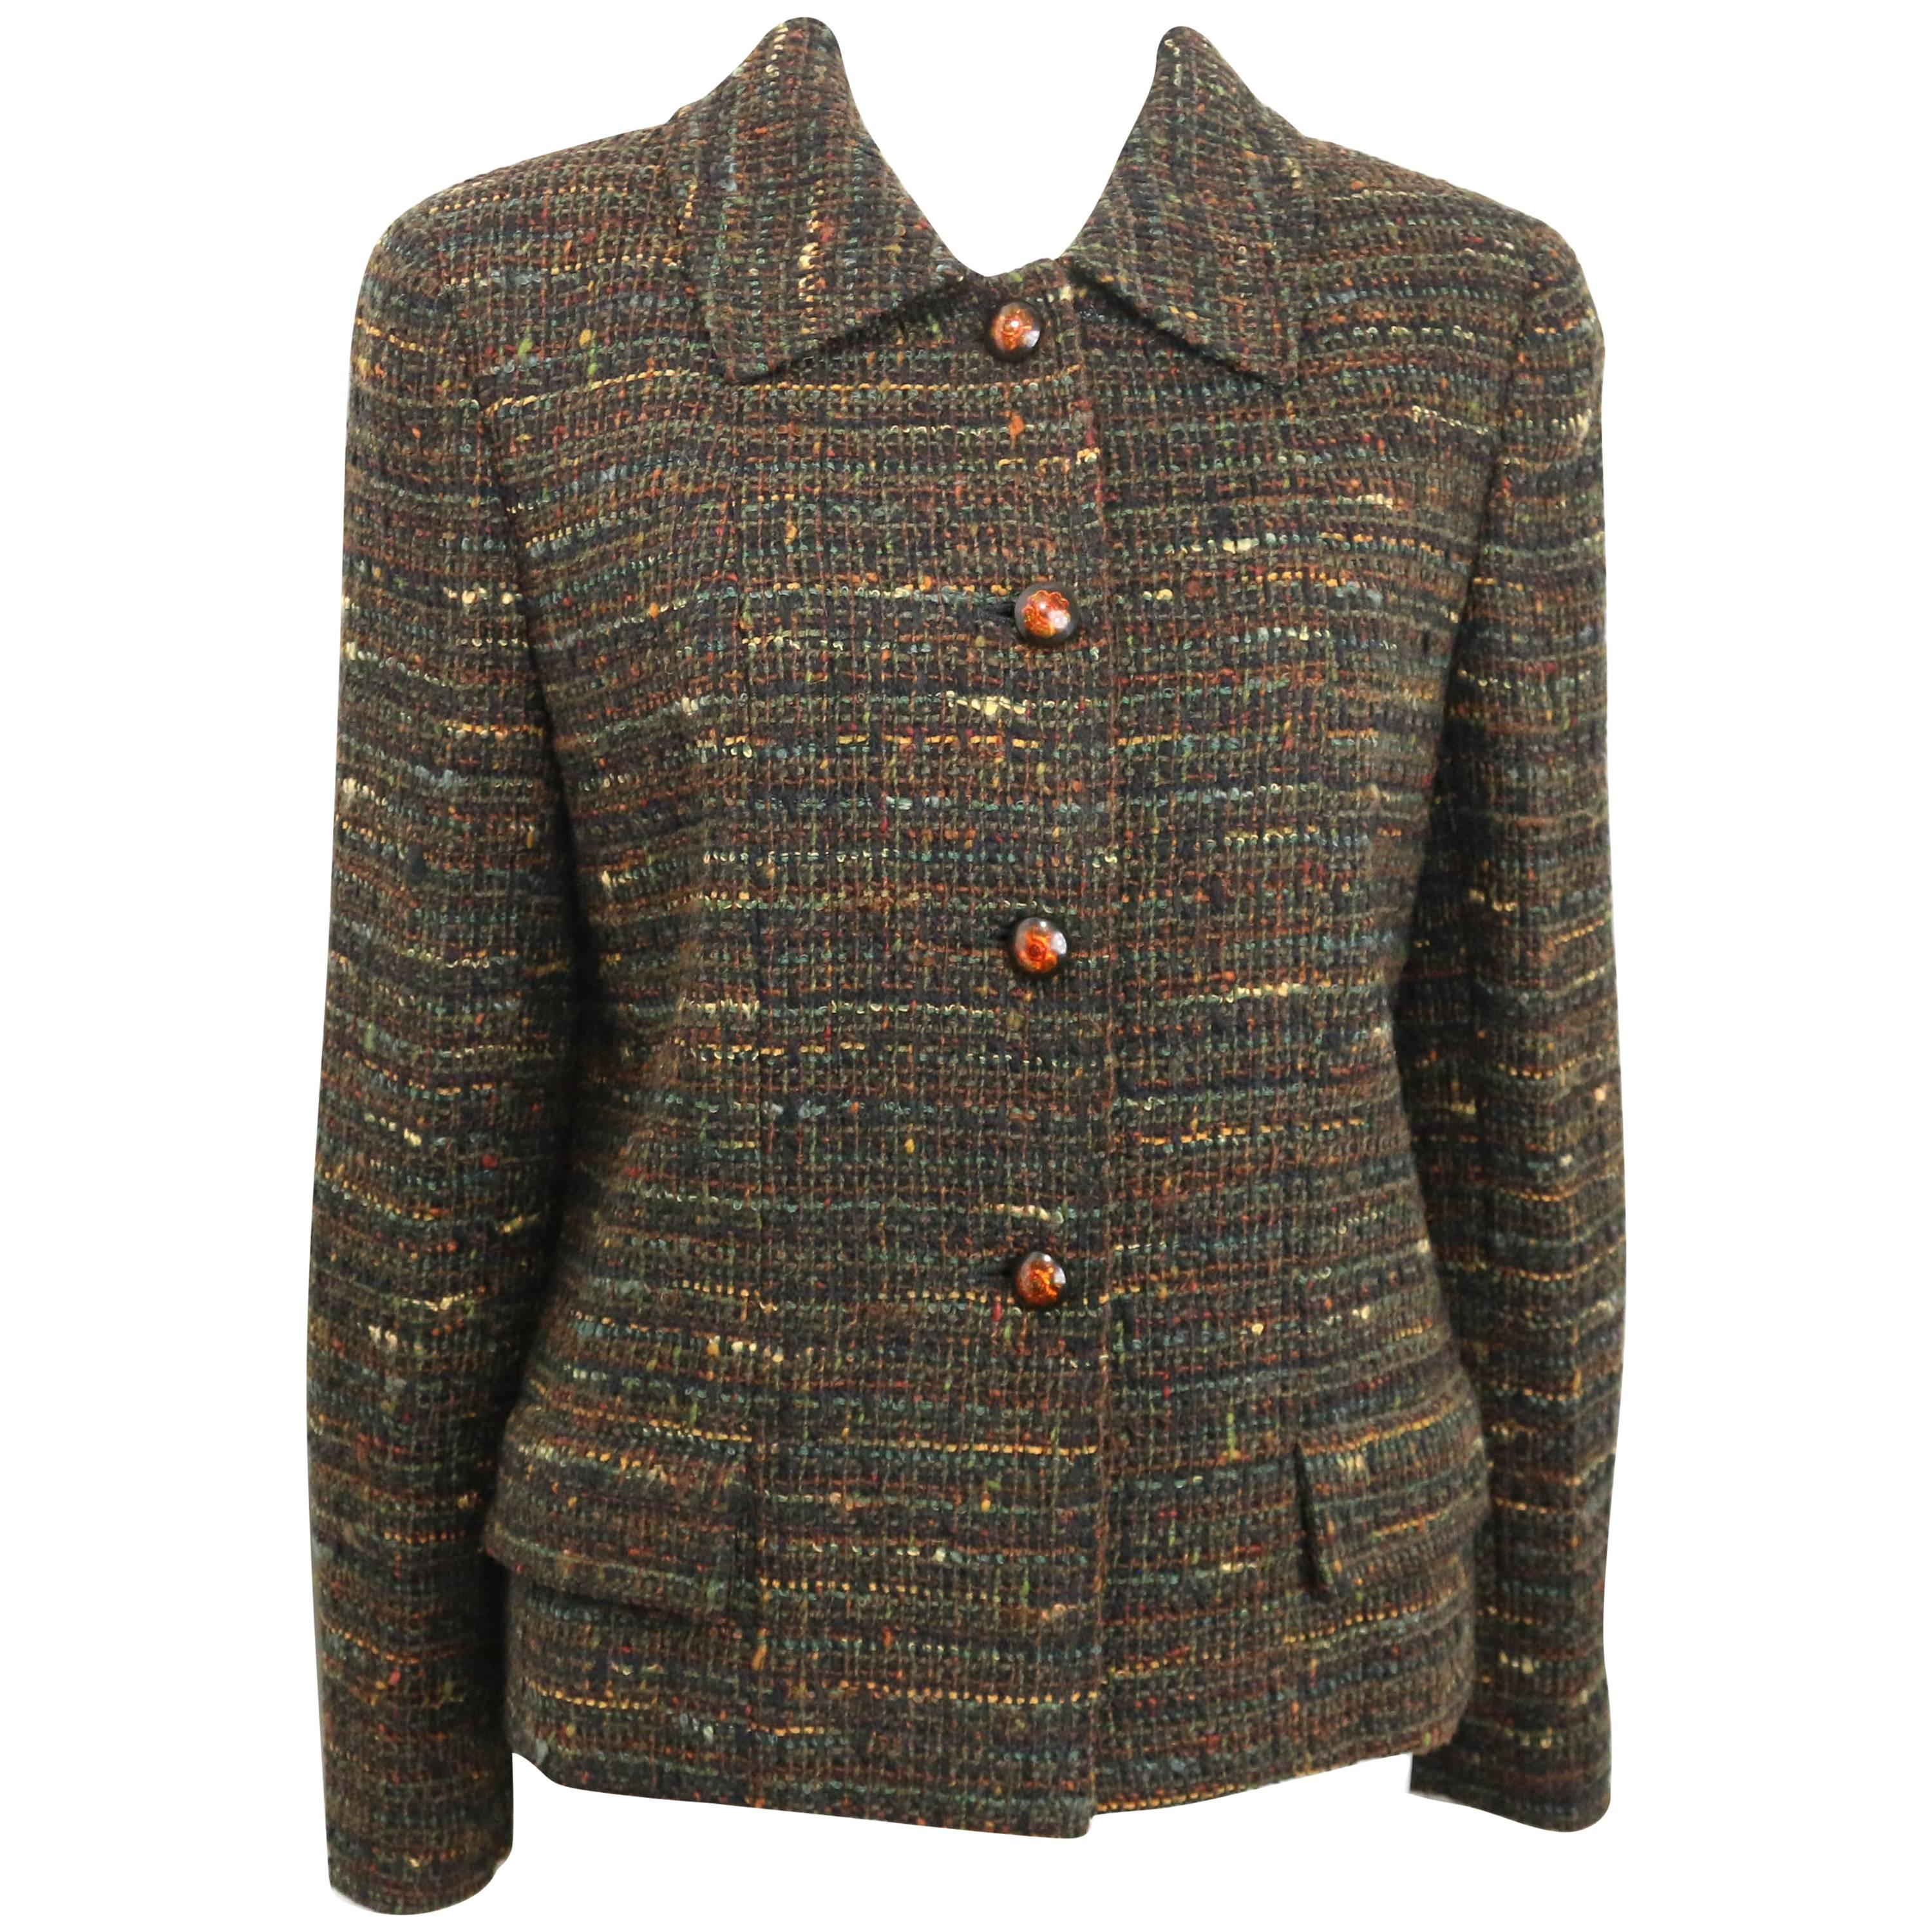 - Vintage Chanel brown multi colour (green, brown, black, etc...) cropped tweed jacket from 1998 A/W collection. Featuring four orange camellia flower buttons closure and on each cuff, two flap pocket. 

- Made in France. 

- Size 42. 

- Bust: 32